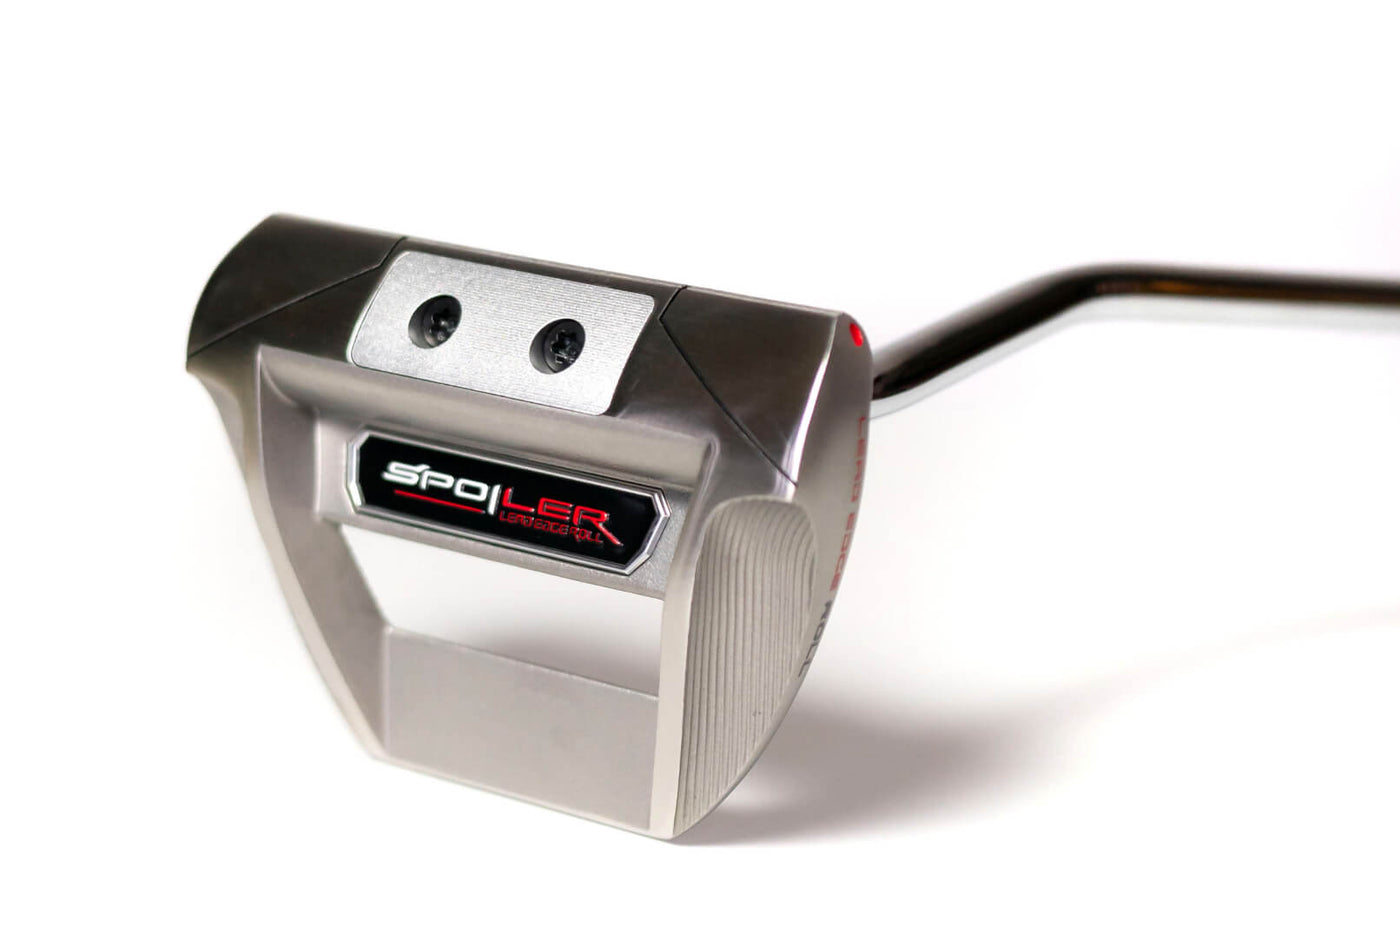 close-up product photo of the Spoiler Putter